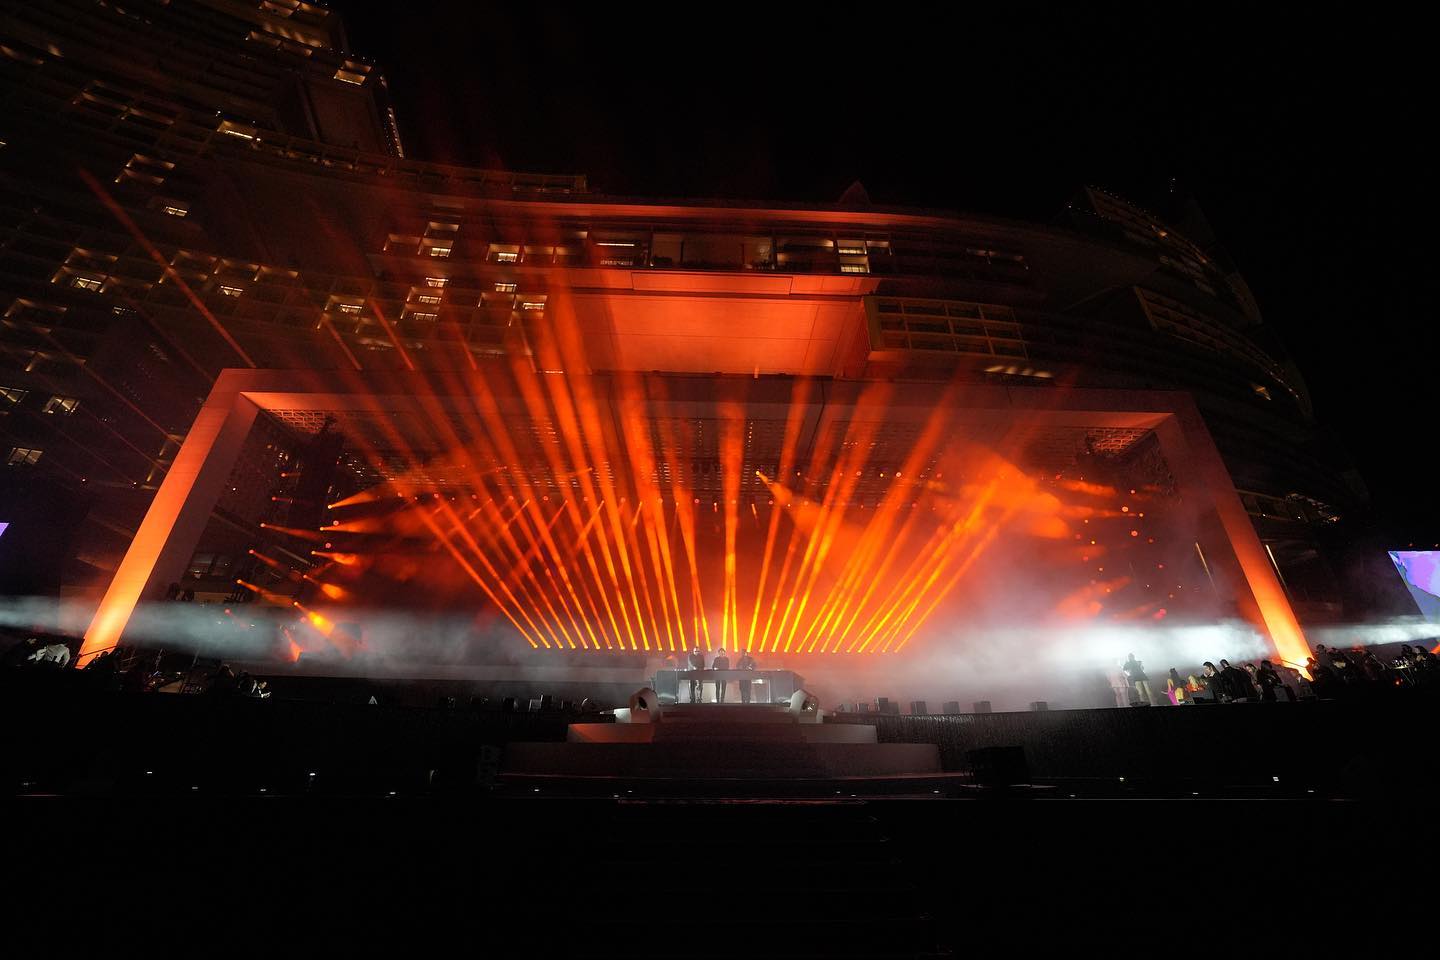 PRG provided a turnkey technical delivery for the three-day extravaganza, including a mammoth installation of lighting across the façade of the property as well and large-scale audio, video and rigging for the Atlantis ‘Grand Reveal’ event.